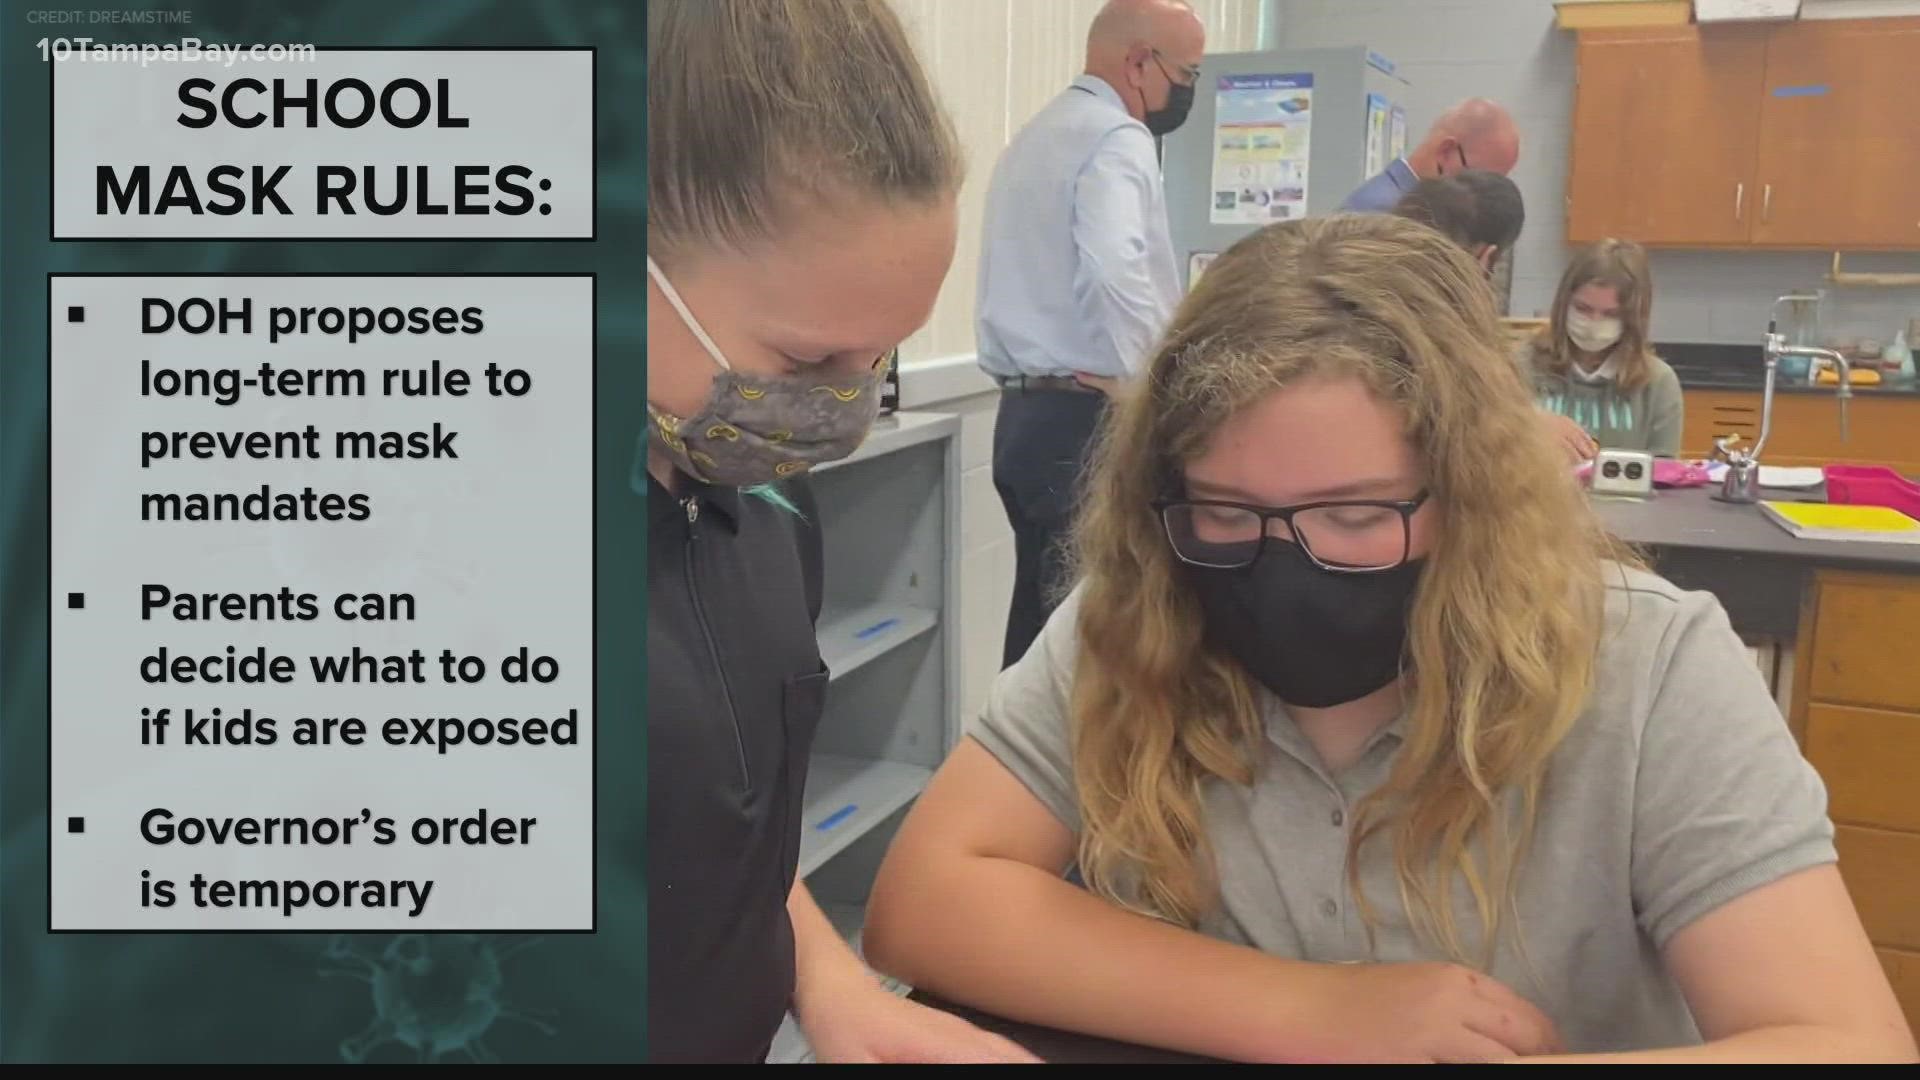 Under an emergency rule, the state gives parents the right to opt their kids out of school mask policies. Now, Florida hopes to make its rule long-term.